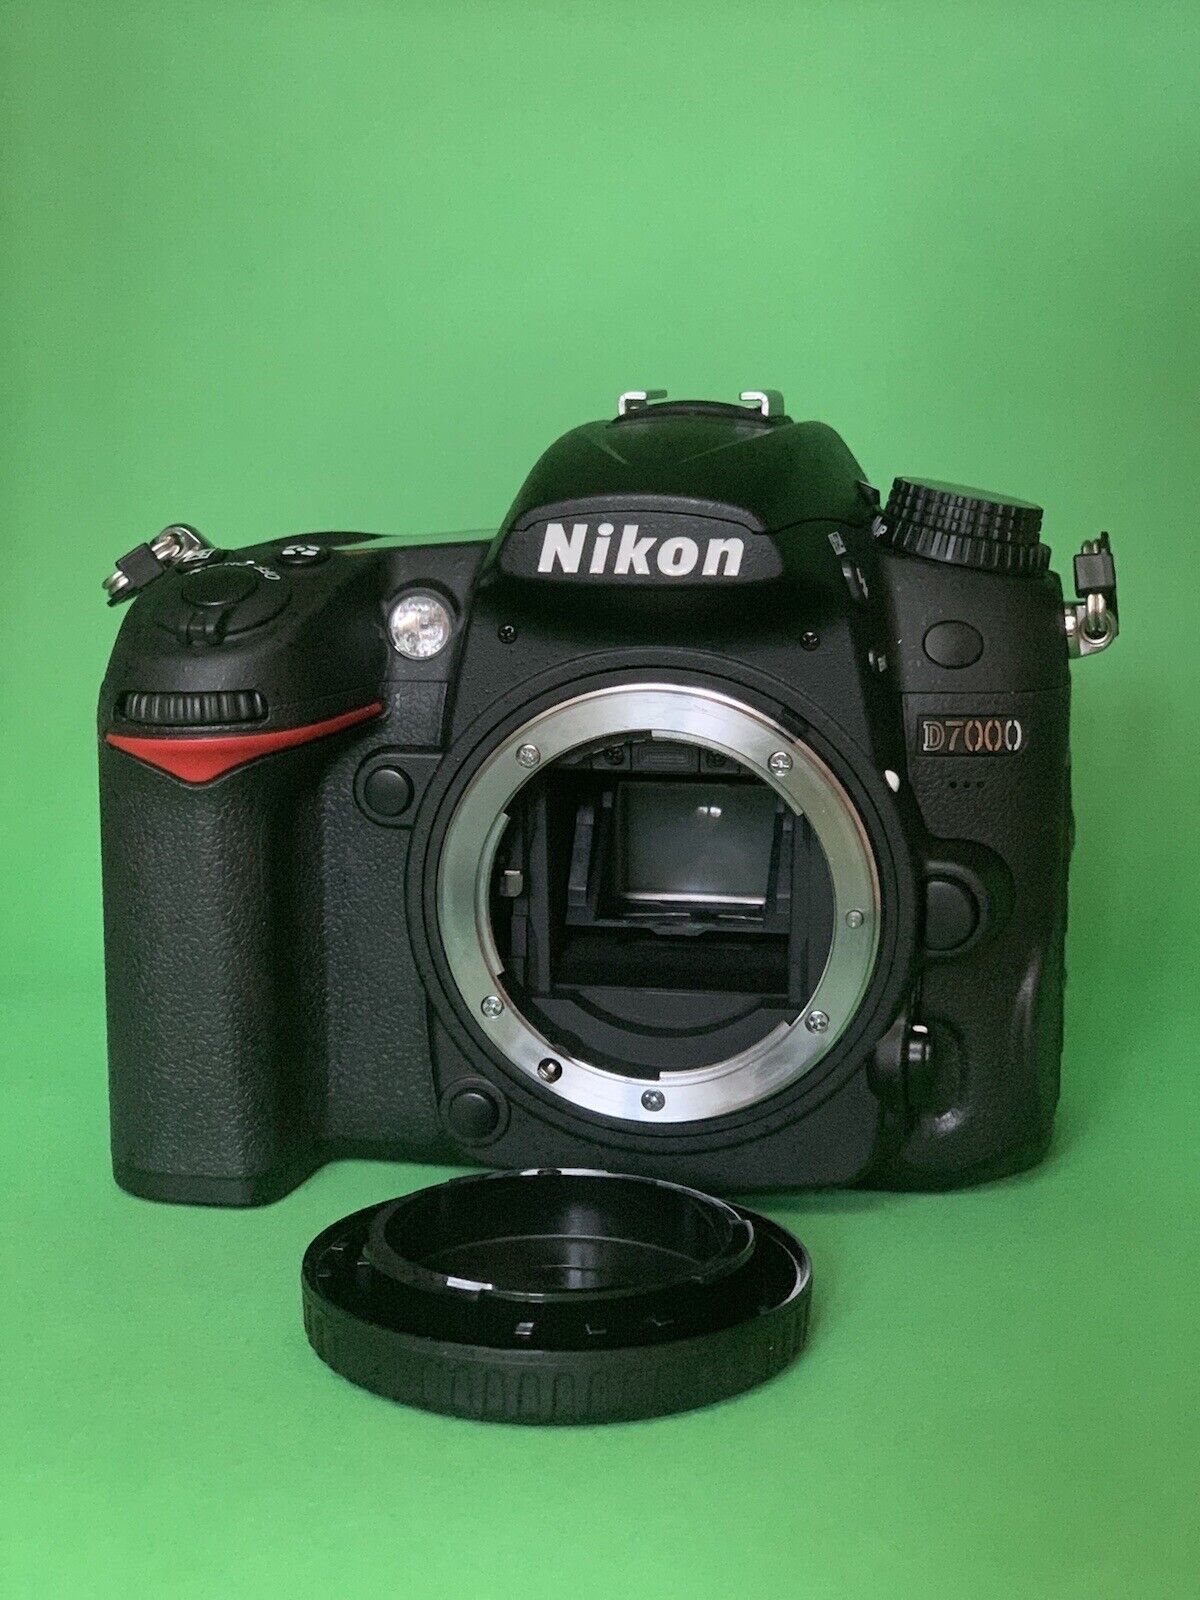 Nikon D7000 Digital SLR Camera Body with Charger, Battery and Accessories